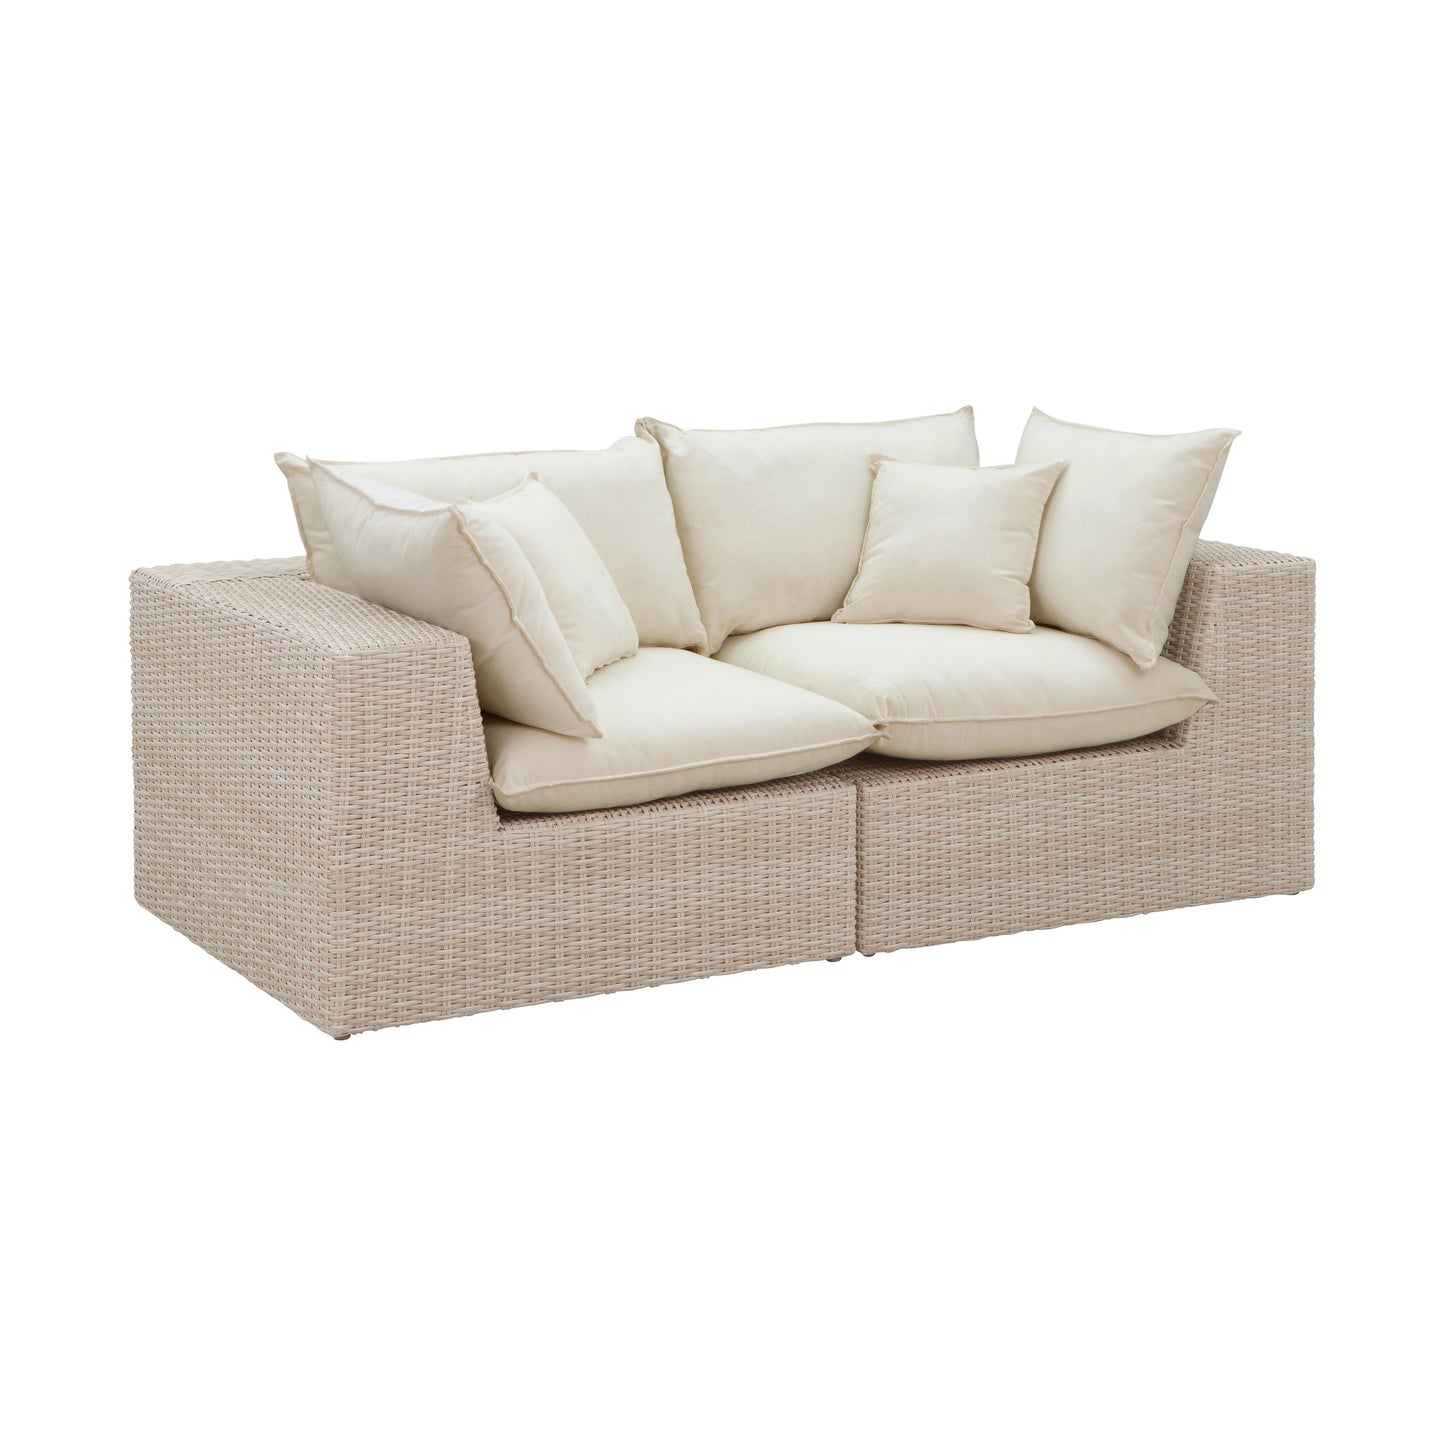 Cali Natural Wicker Outdoor Modular Loveseat by TOV